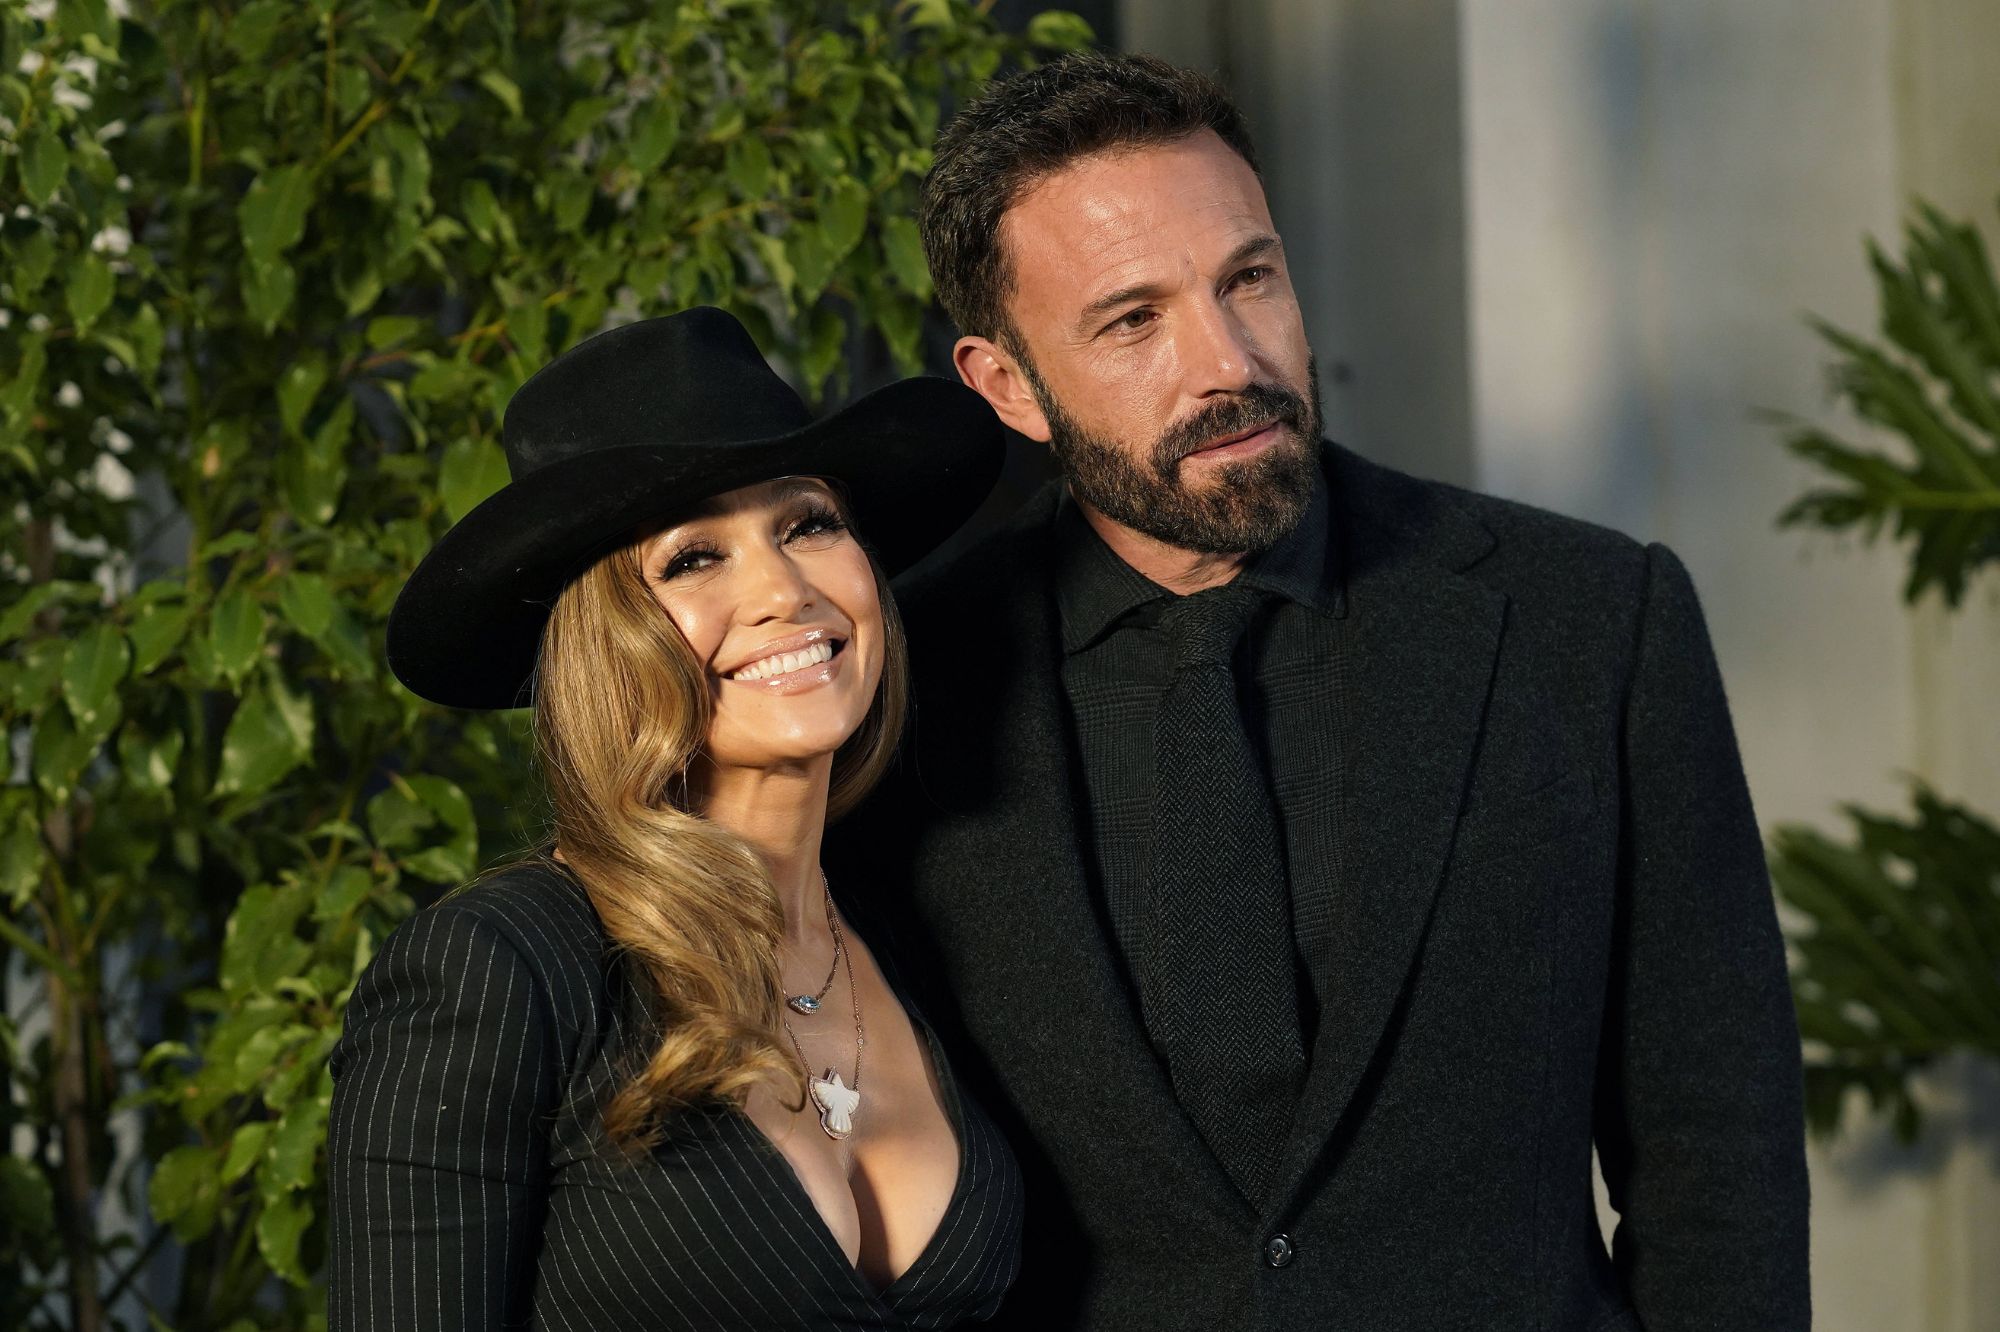 Jennifer Lopez and Ben Affleck improvise a duet on the Christmas song